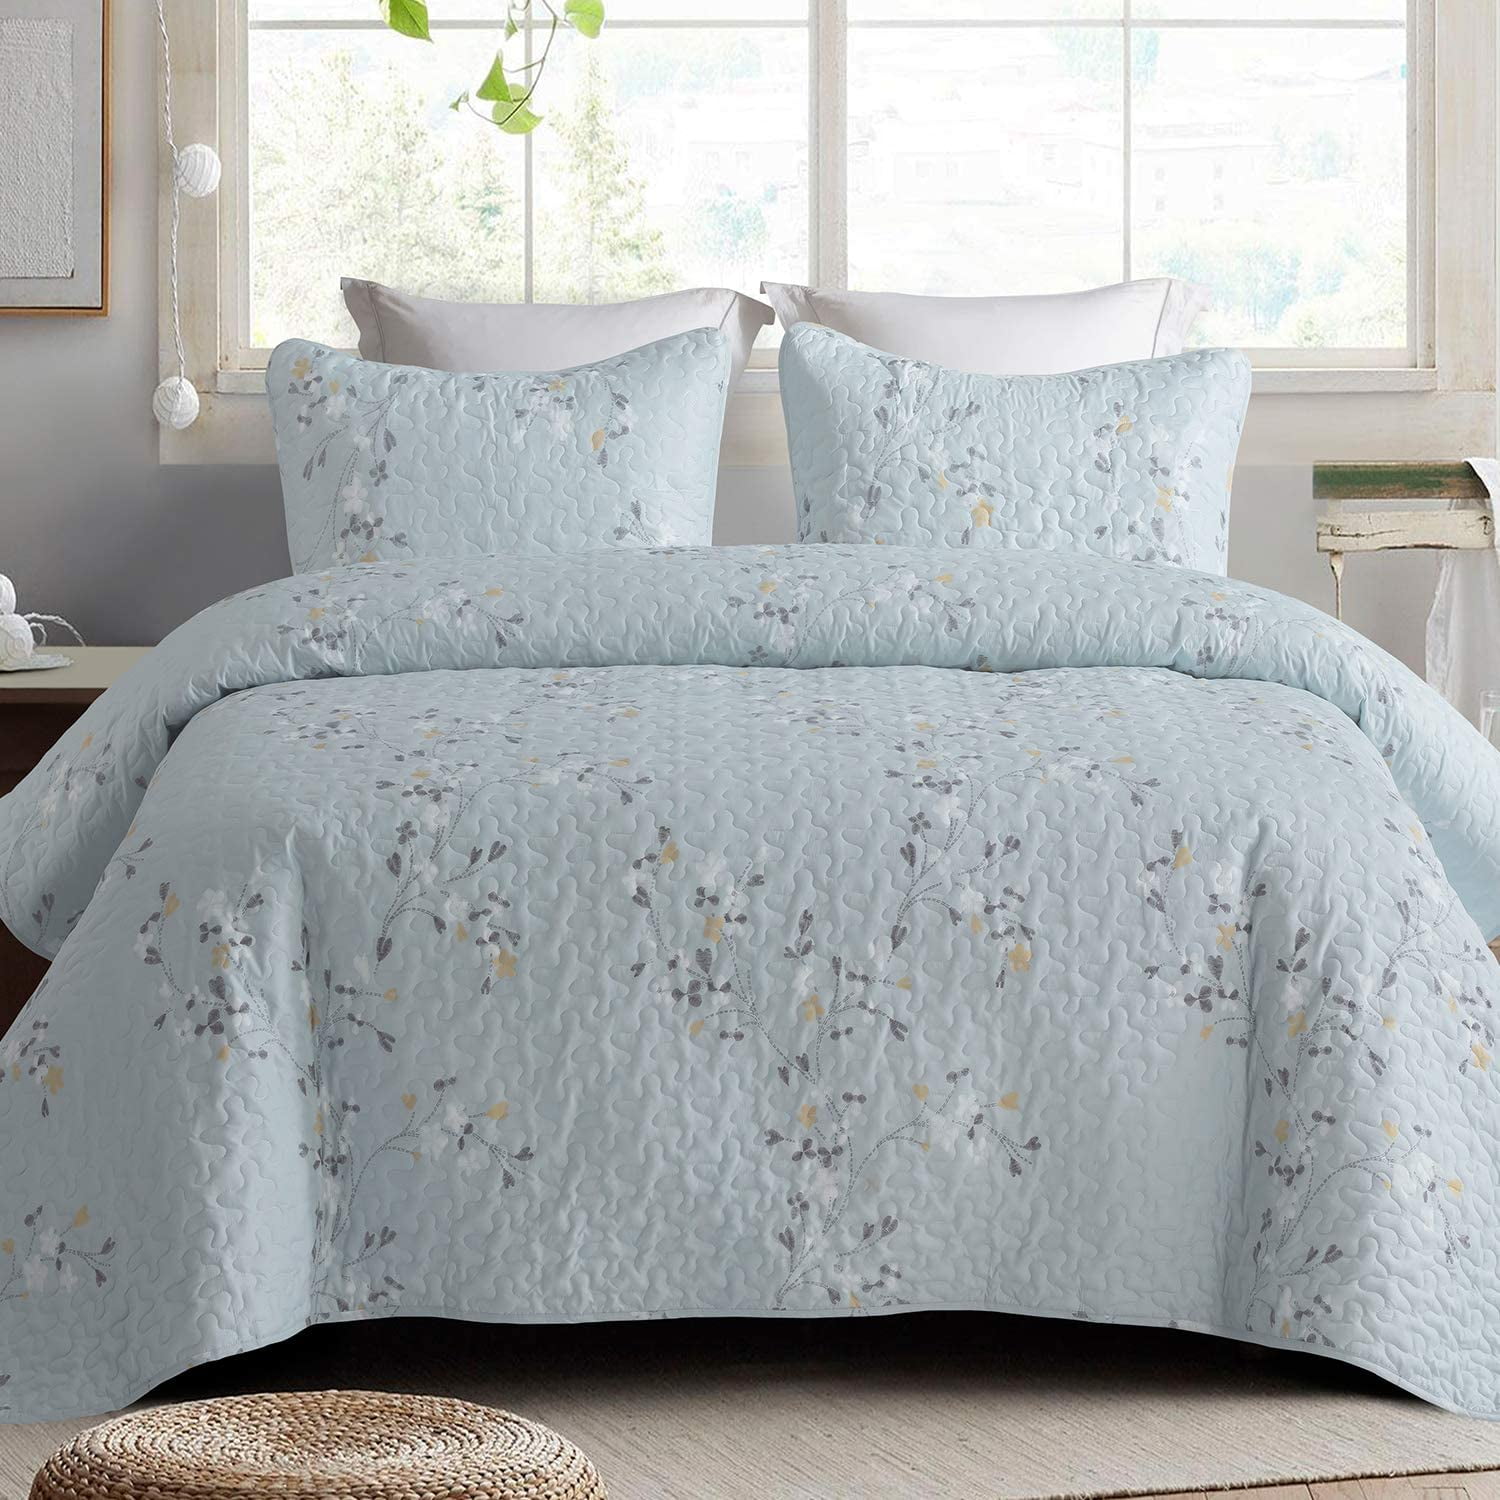 All Season Lightweight Soft Printed Pattern Bedding Bedspread Coverlet Set 3 Pieces JML Quilt Set King Size Quilt Sets with Shams 